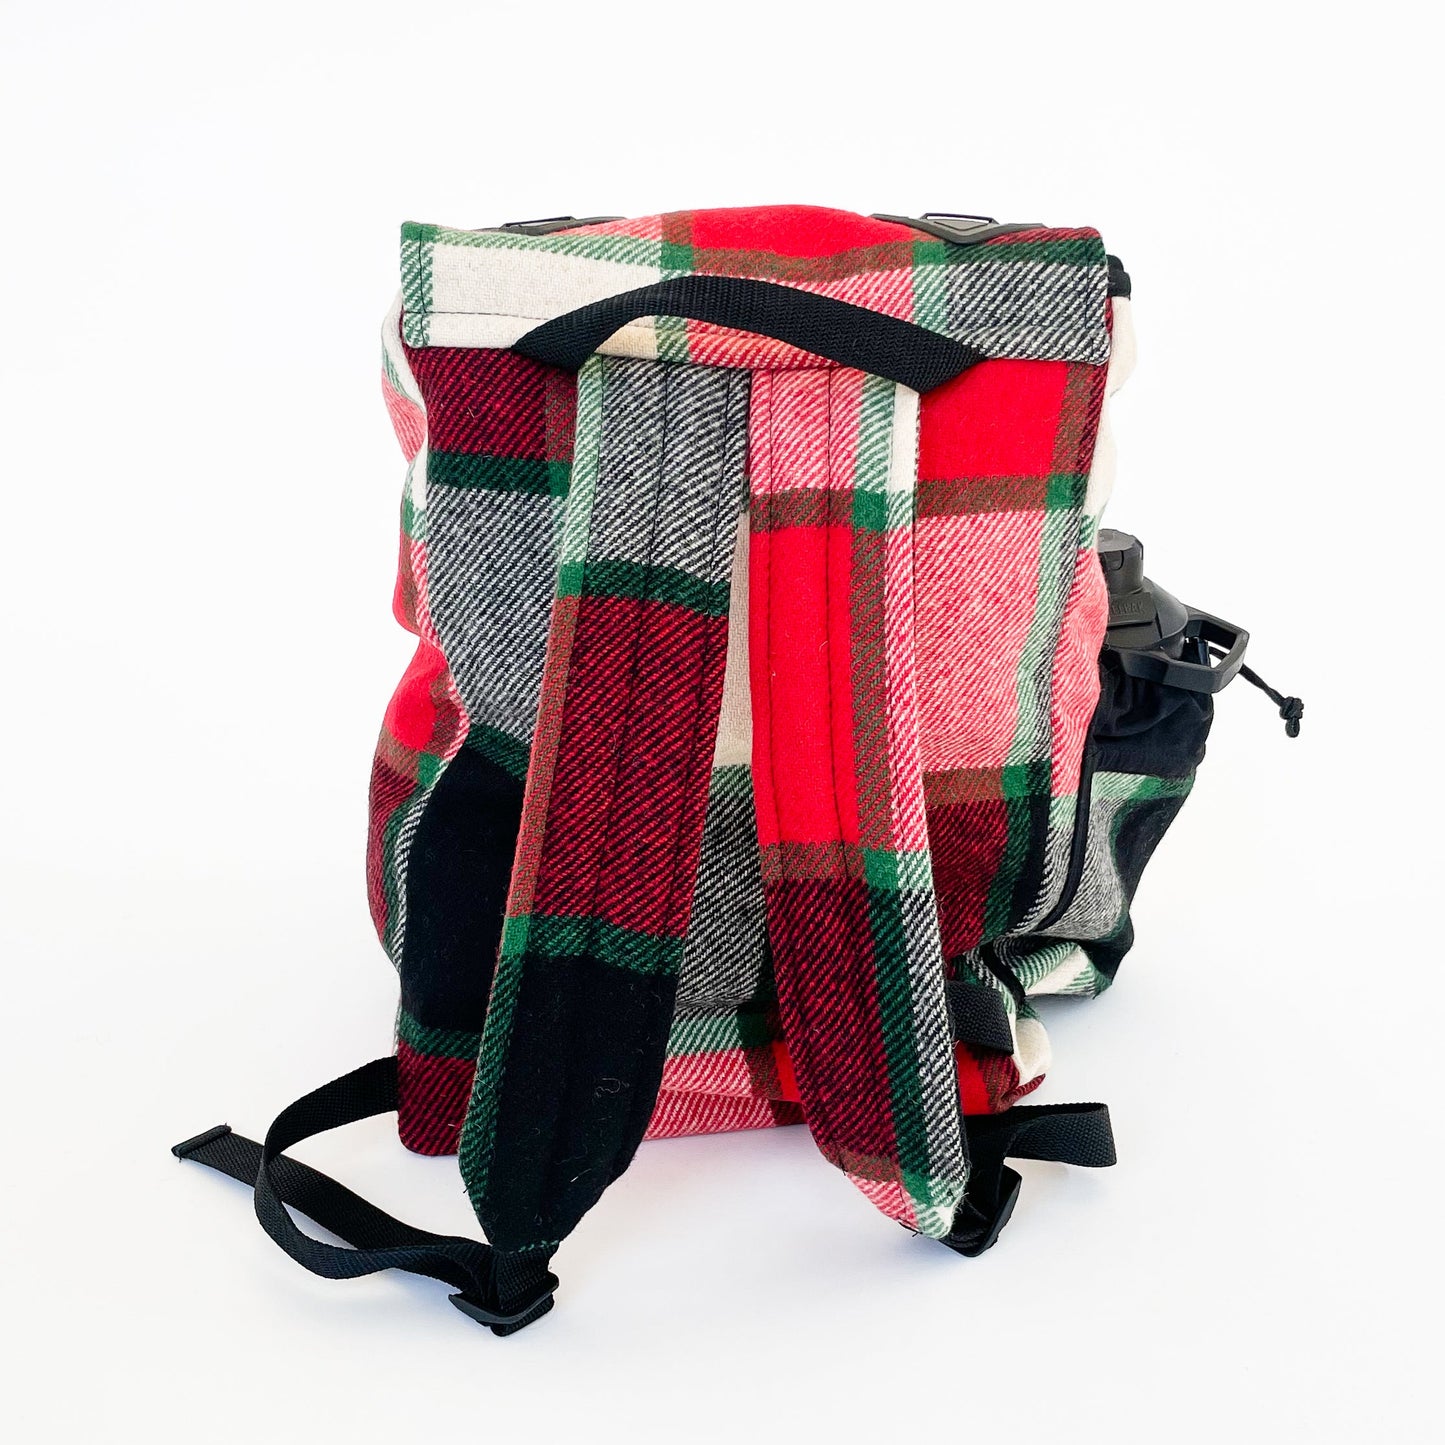 Johnson Woolen Mills Daypack Canadian Plaid Red/Pink/Green/White/ back view with water bottle in side pocket